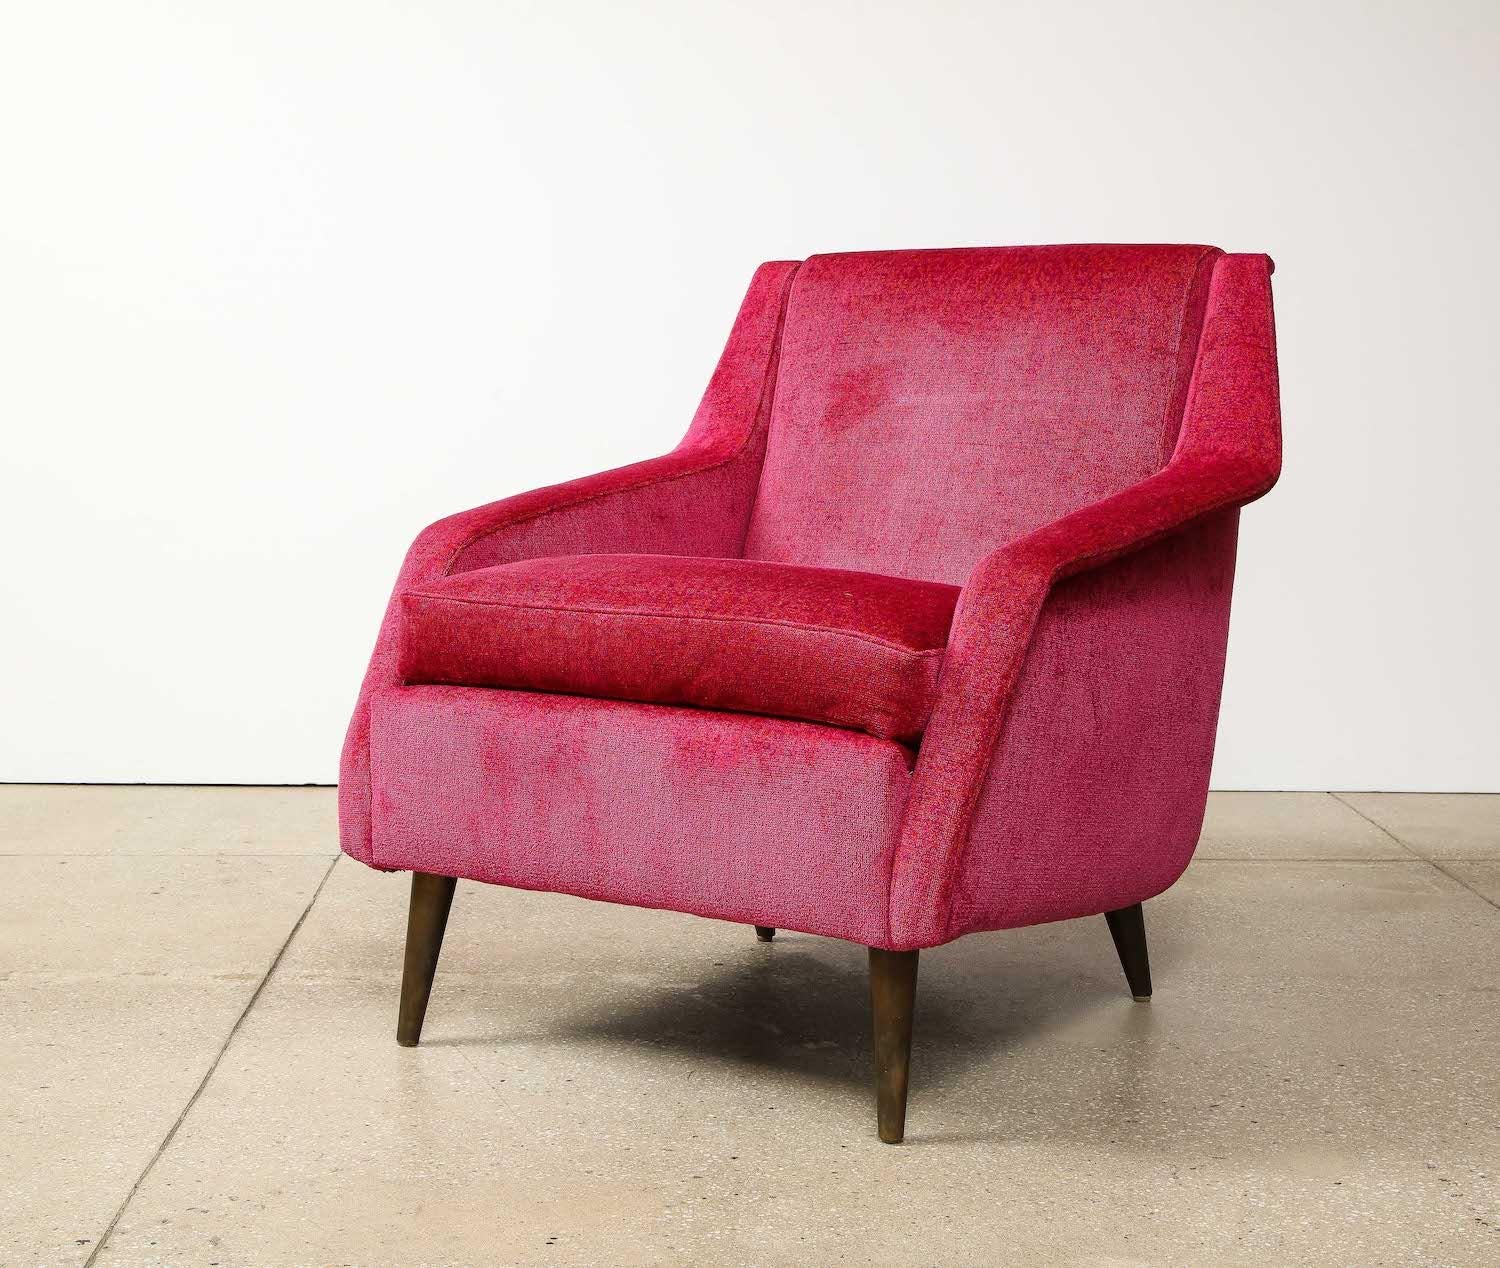 Hand-Crafted #802 Lounge Chair by Carlo de Carli For Sale